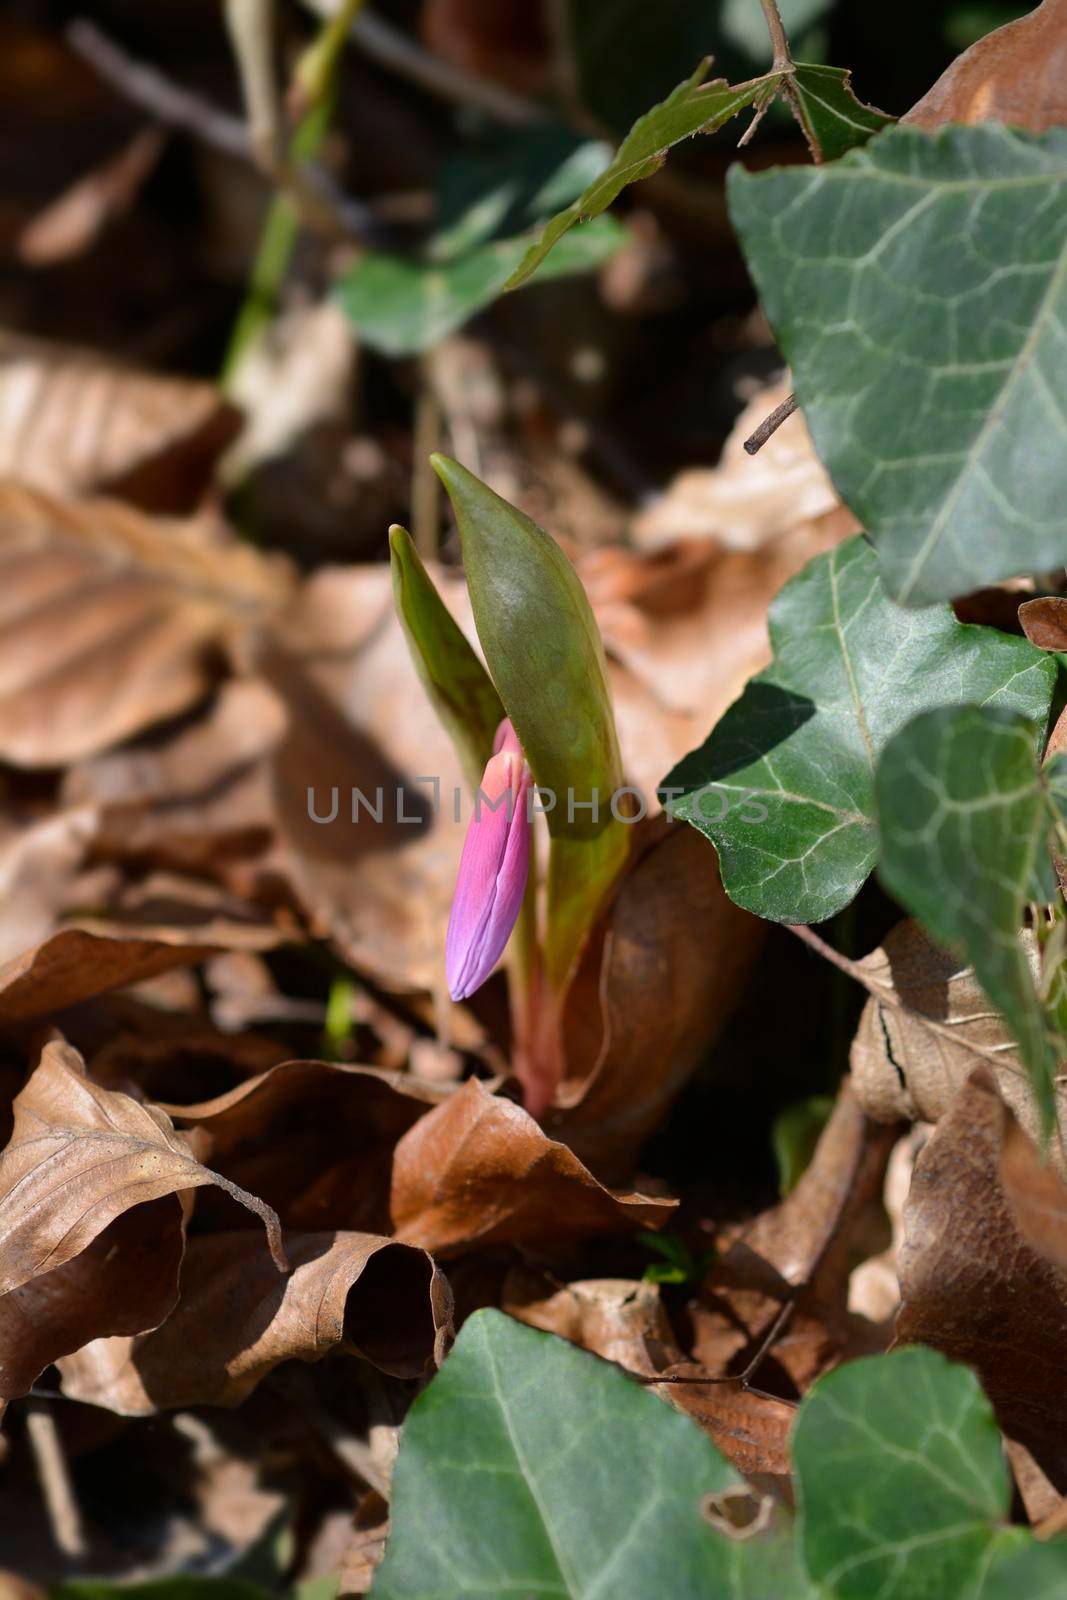 Dogs tooth violet flower bud - Latin name - Erythronium dens-canis